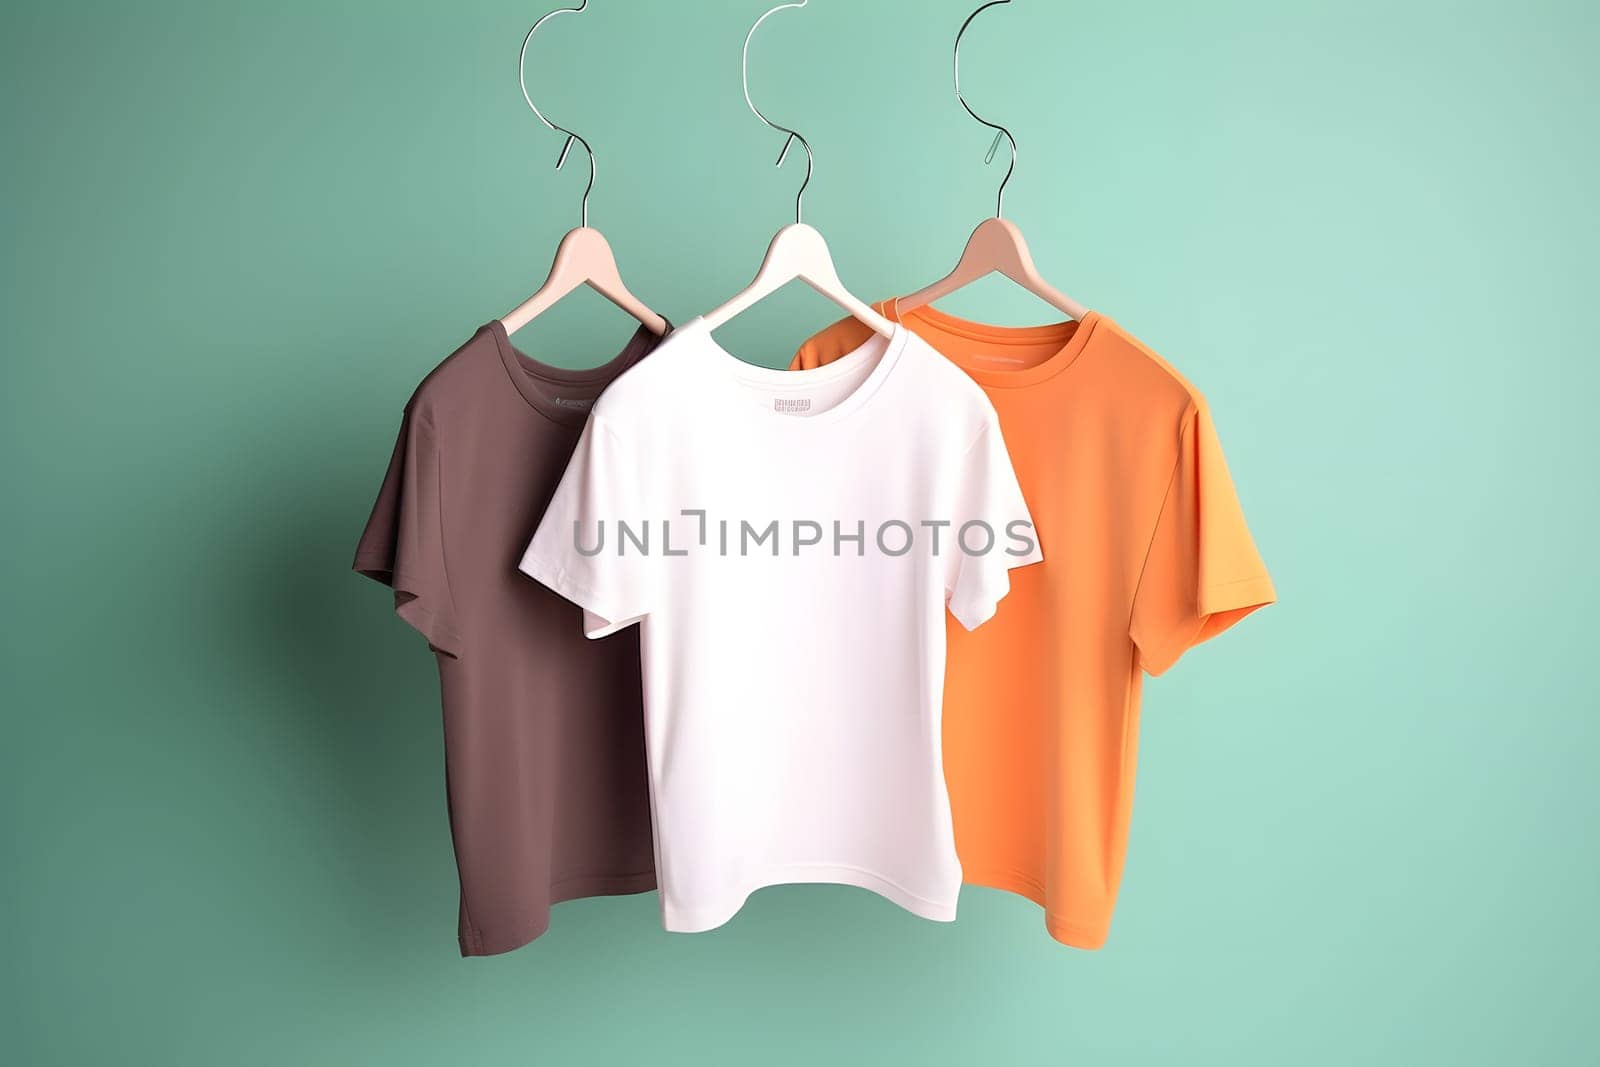 Hangers with blank monocolor t-shirts on turquoise background. Neural network generated in May 2023. Not based on any actual scene or pattern.